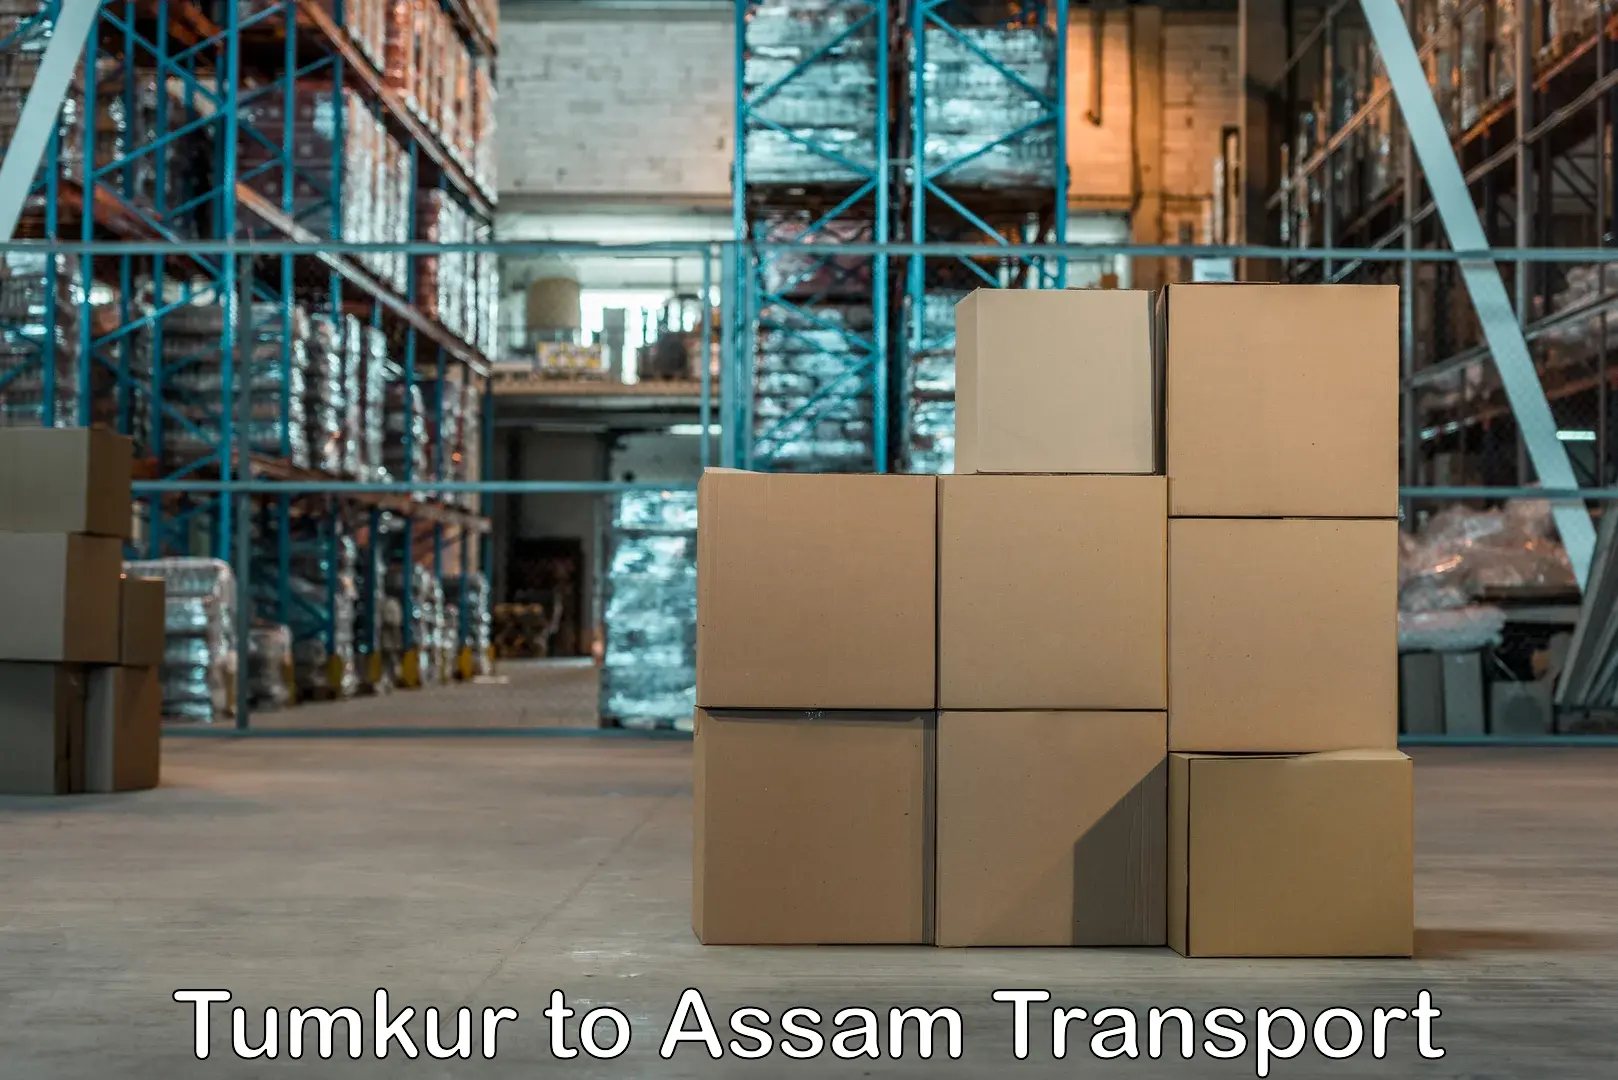 Daily transport service Tumkur to Assam